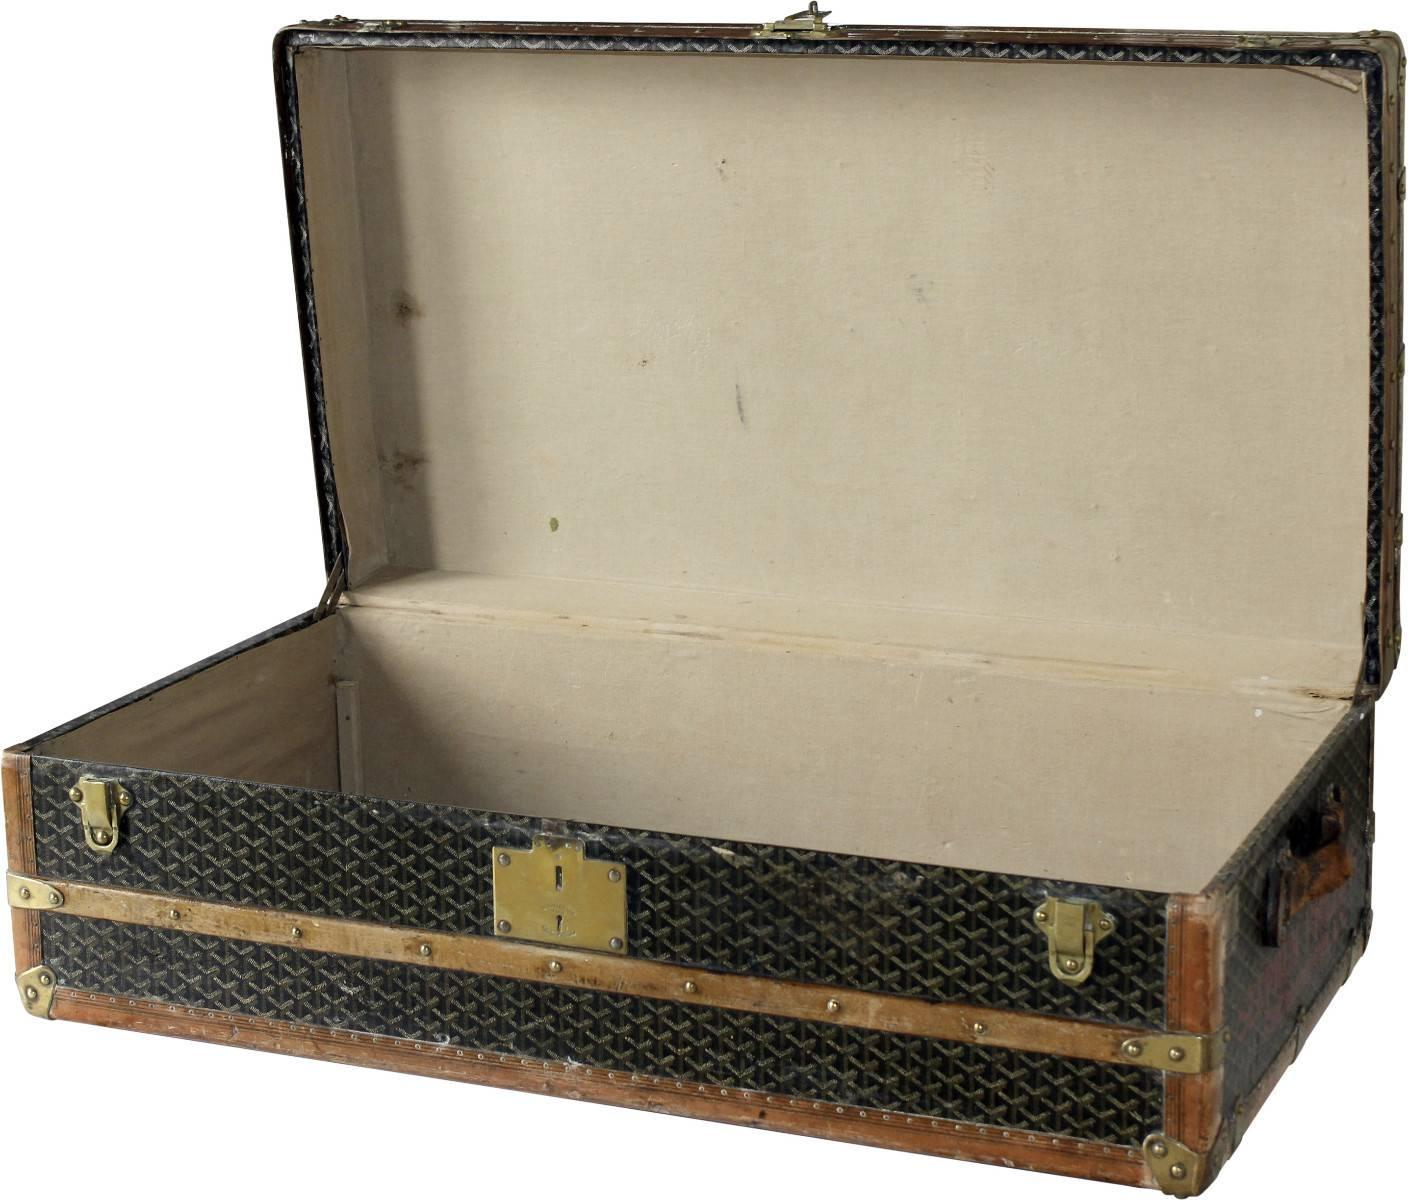 This extremely rare Goyard cabin trunk is a true statement piece and is in excellent condition. Finished in a stunning brown leather edging with a beautiful patina and adorned with brass hardware. This trunk would make an ideal low lying coffee